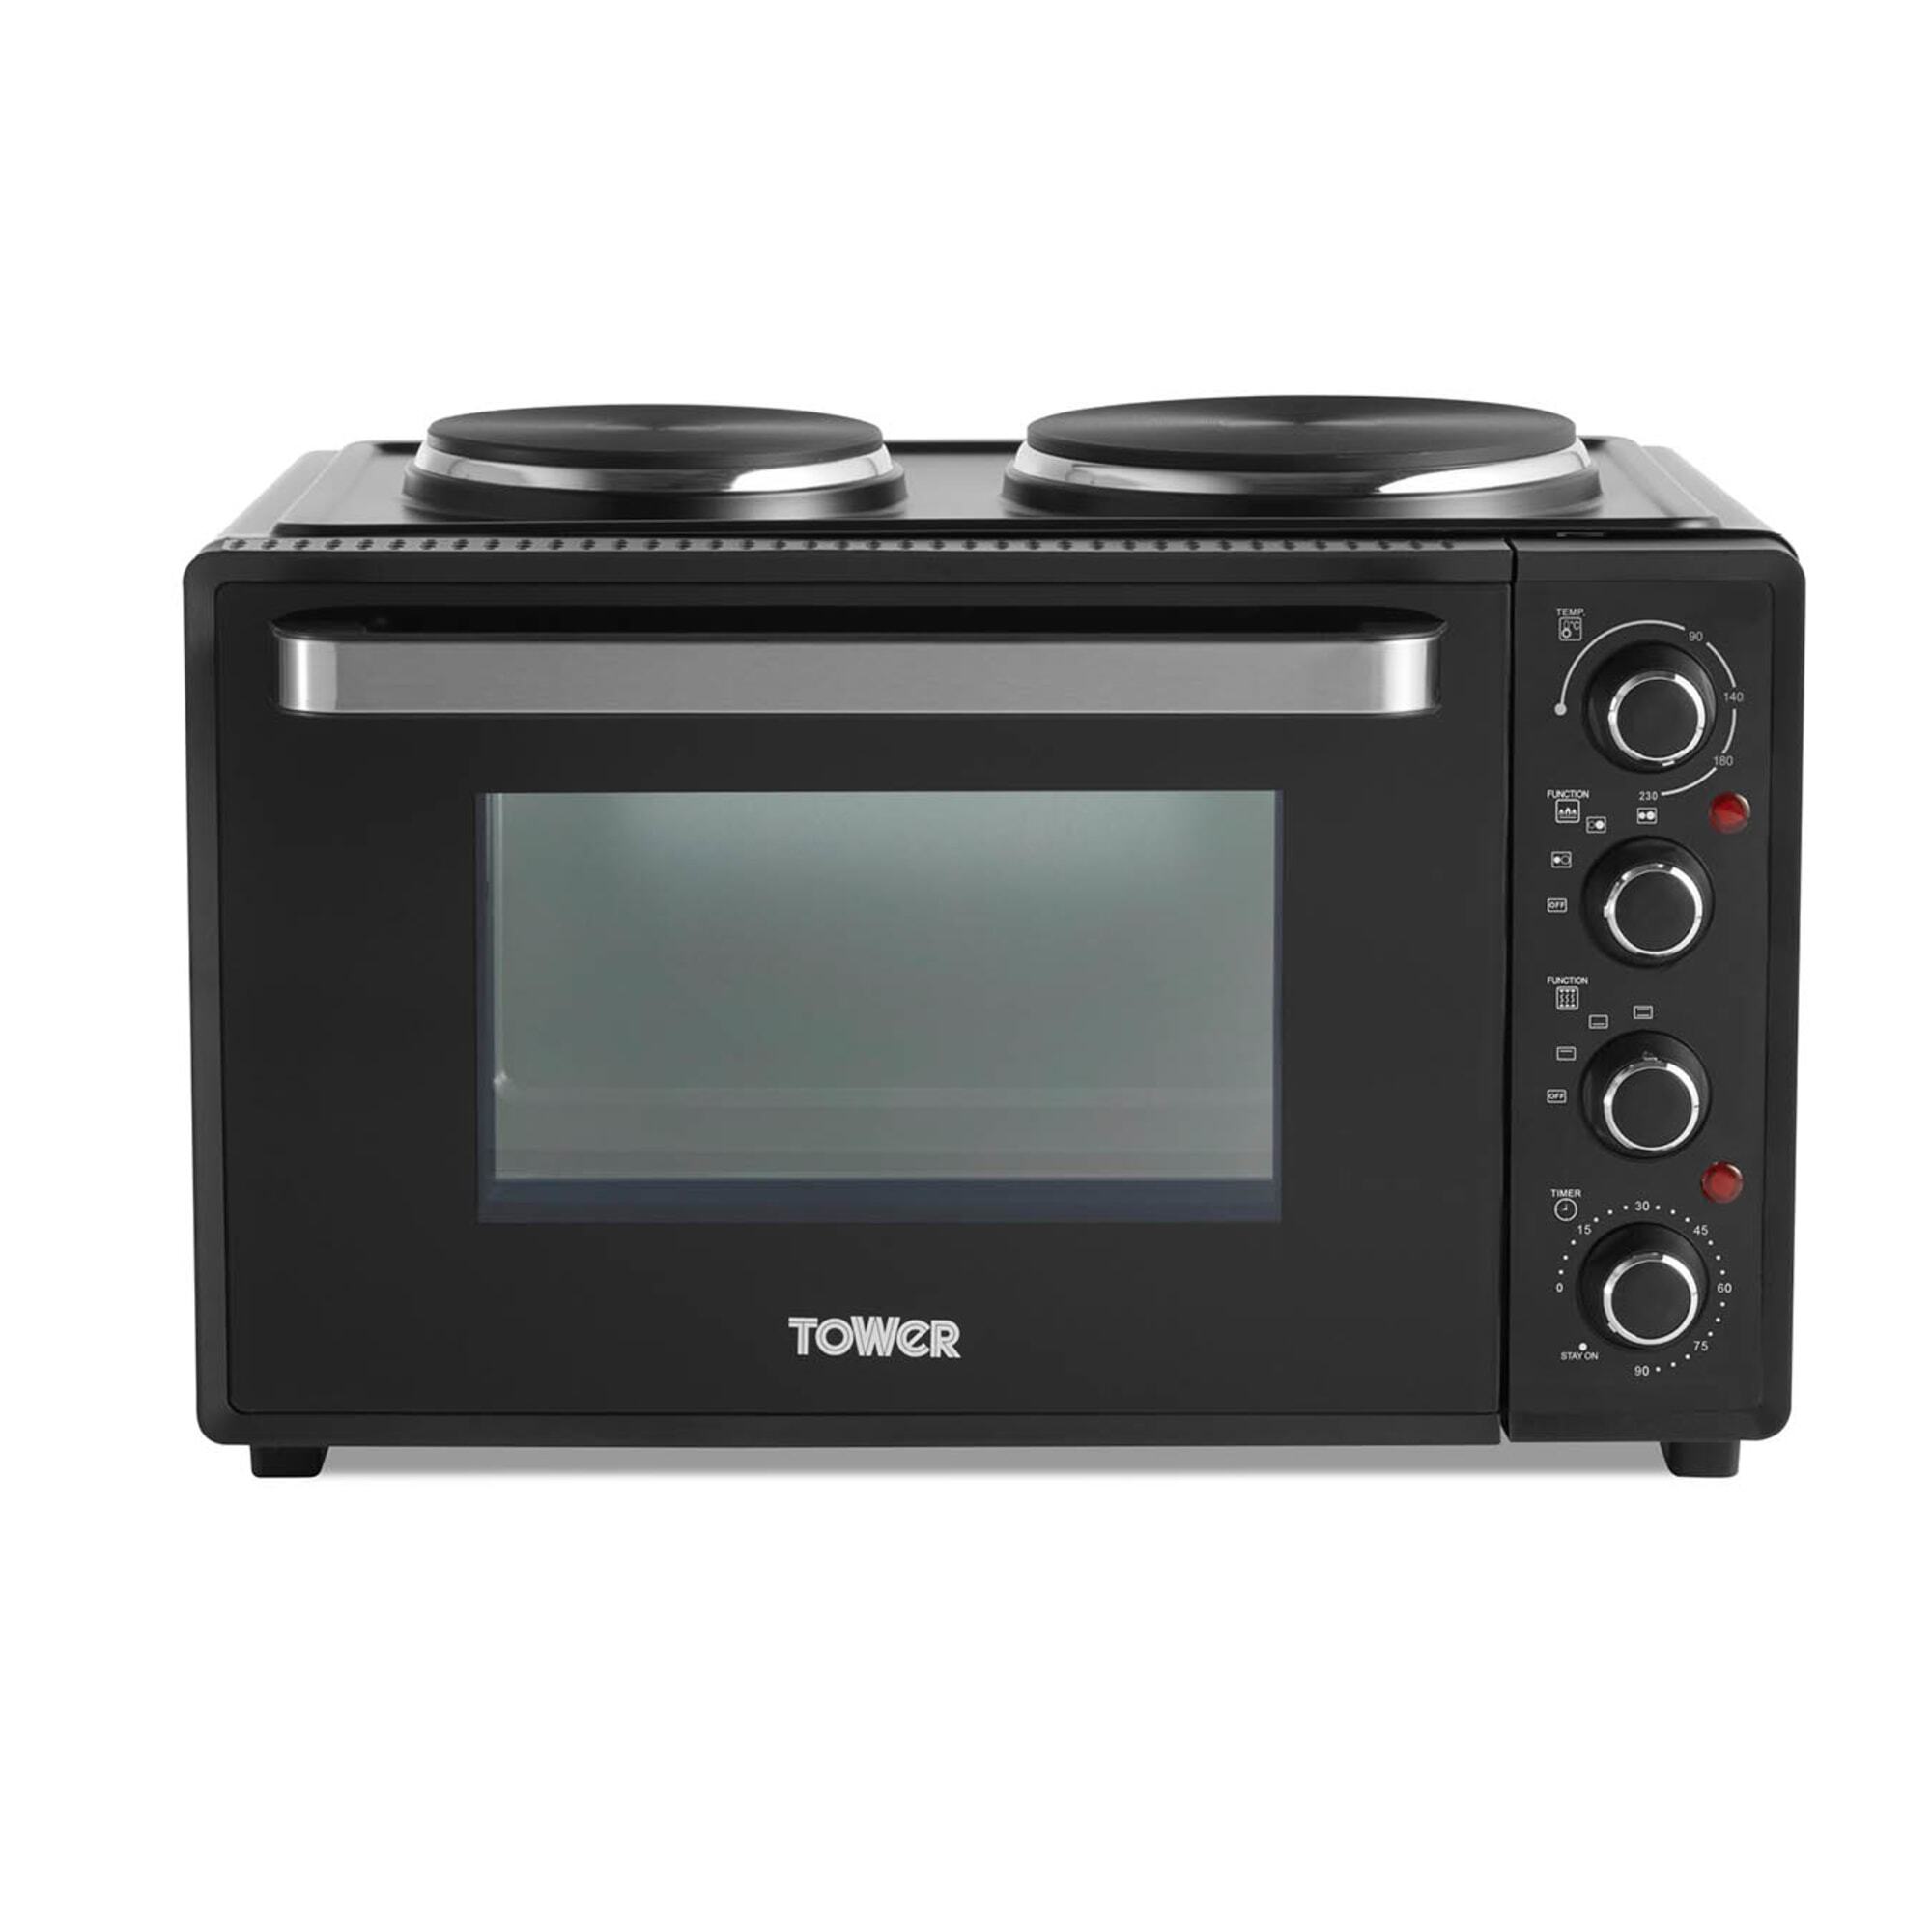 Tower 32L Black Mini Oven with Hot Plates Black